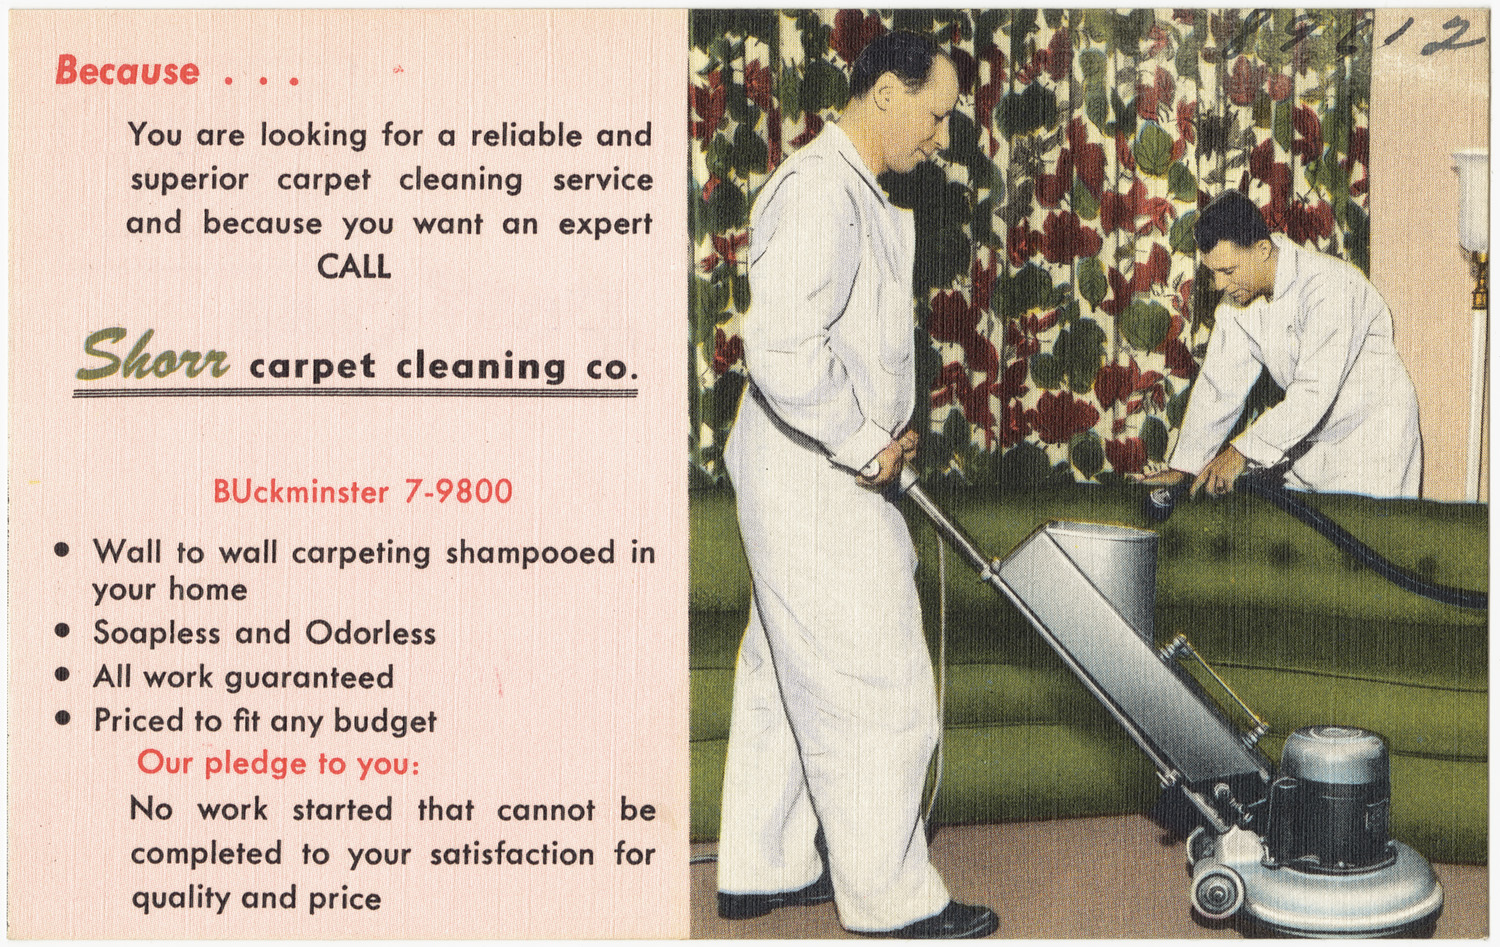 Commercial Carpet Cleaning Services in Edmonton Alberta